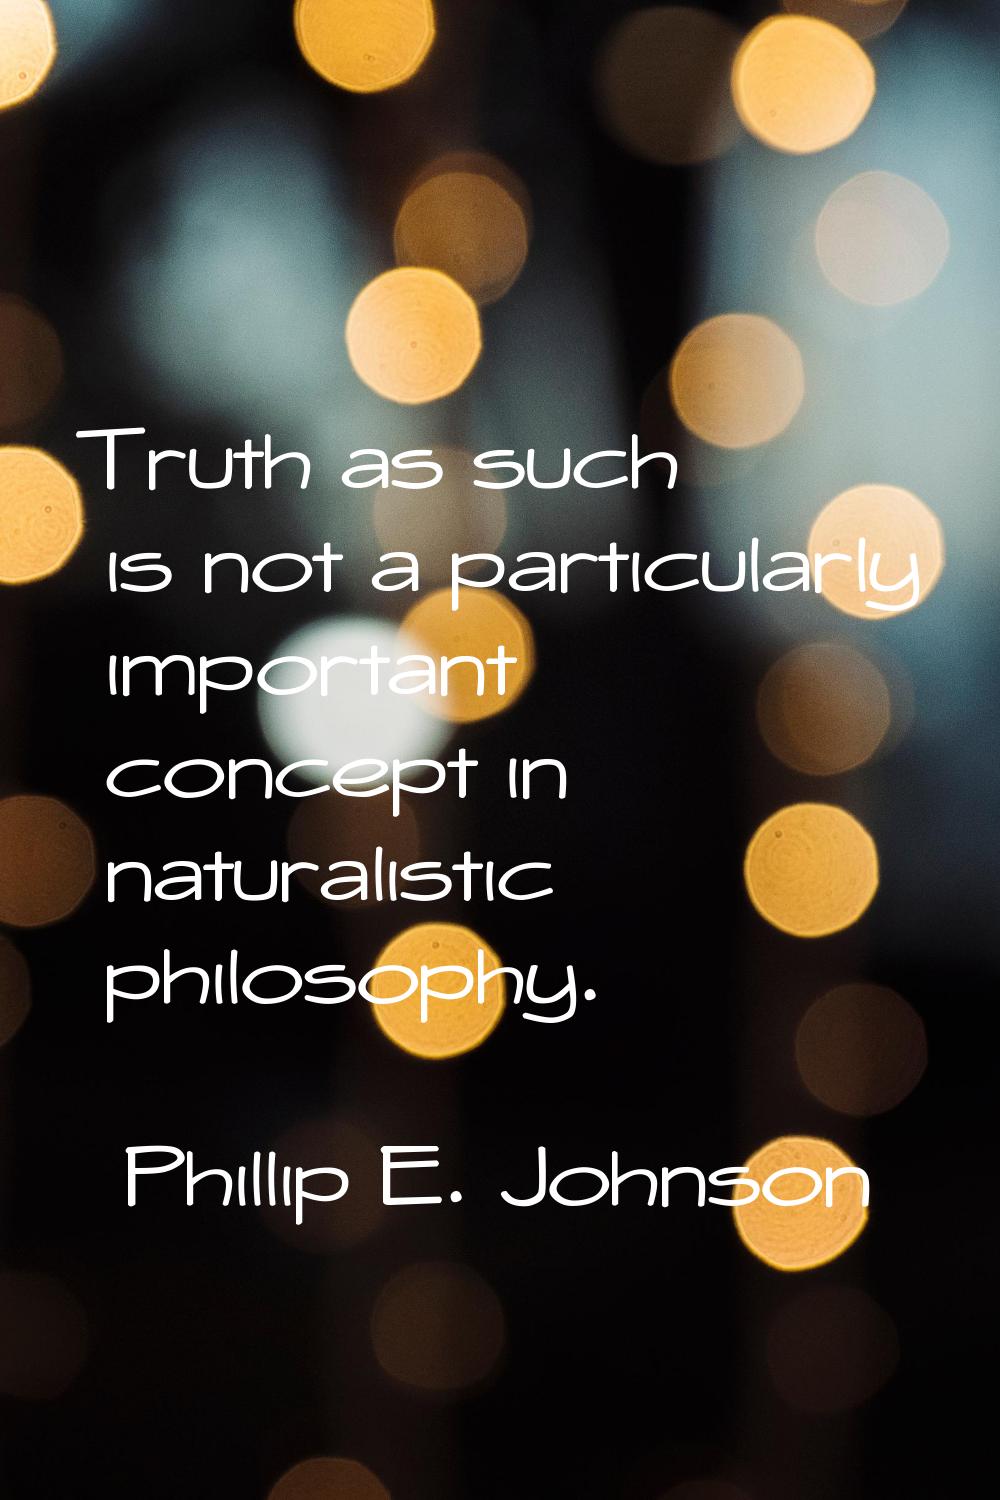 Truth as such is not a particularly important concept in naturalistic philosophy.